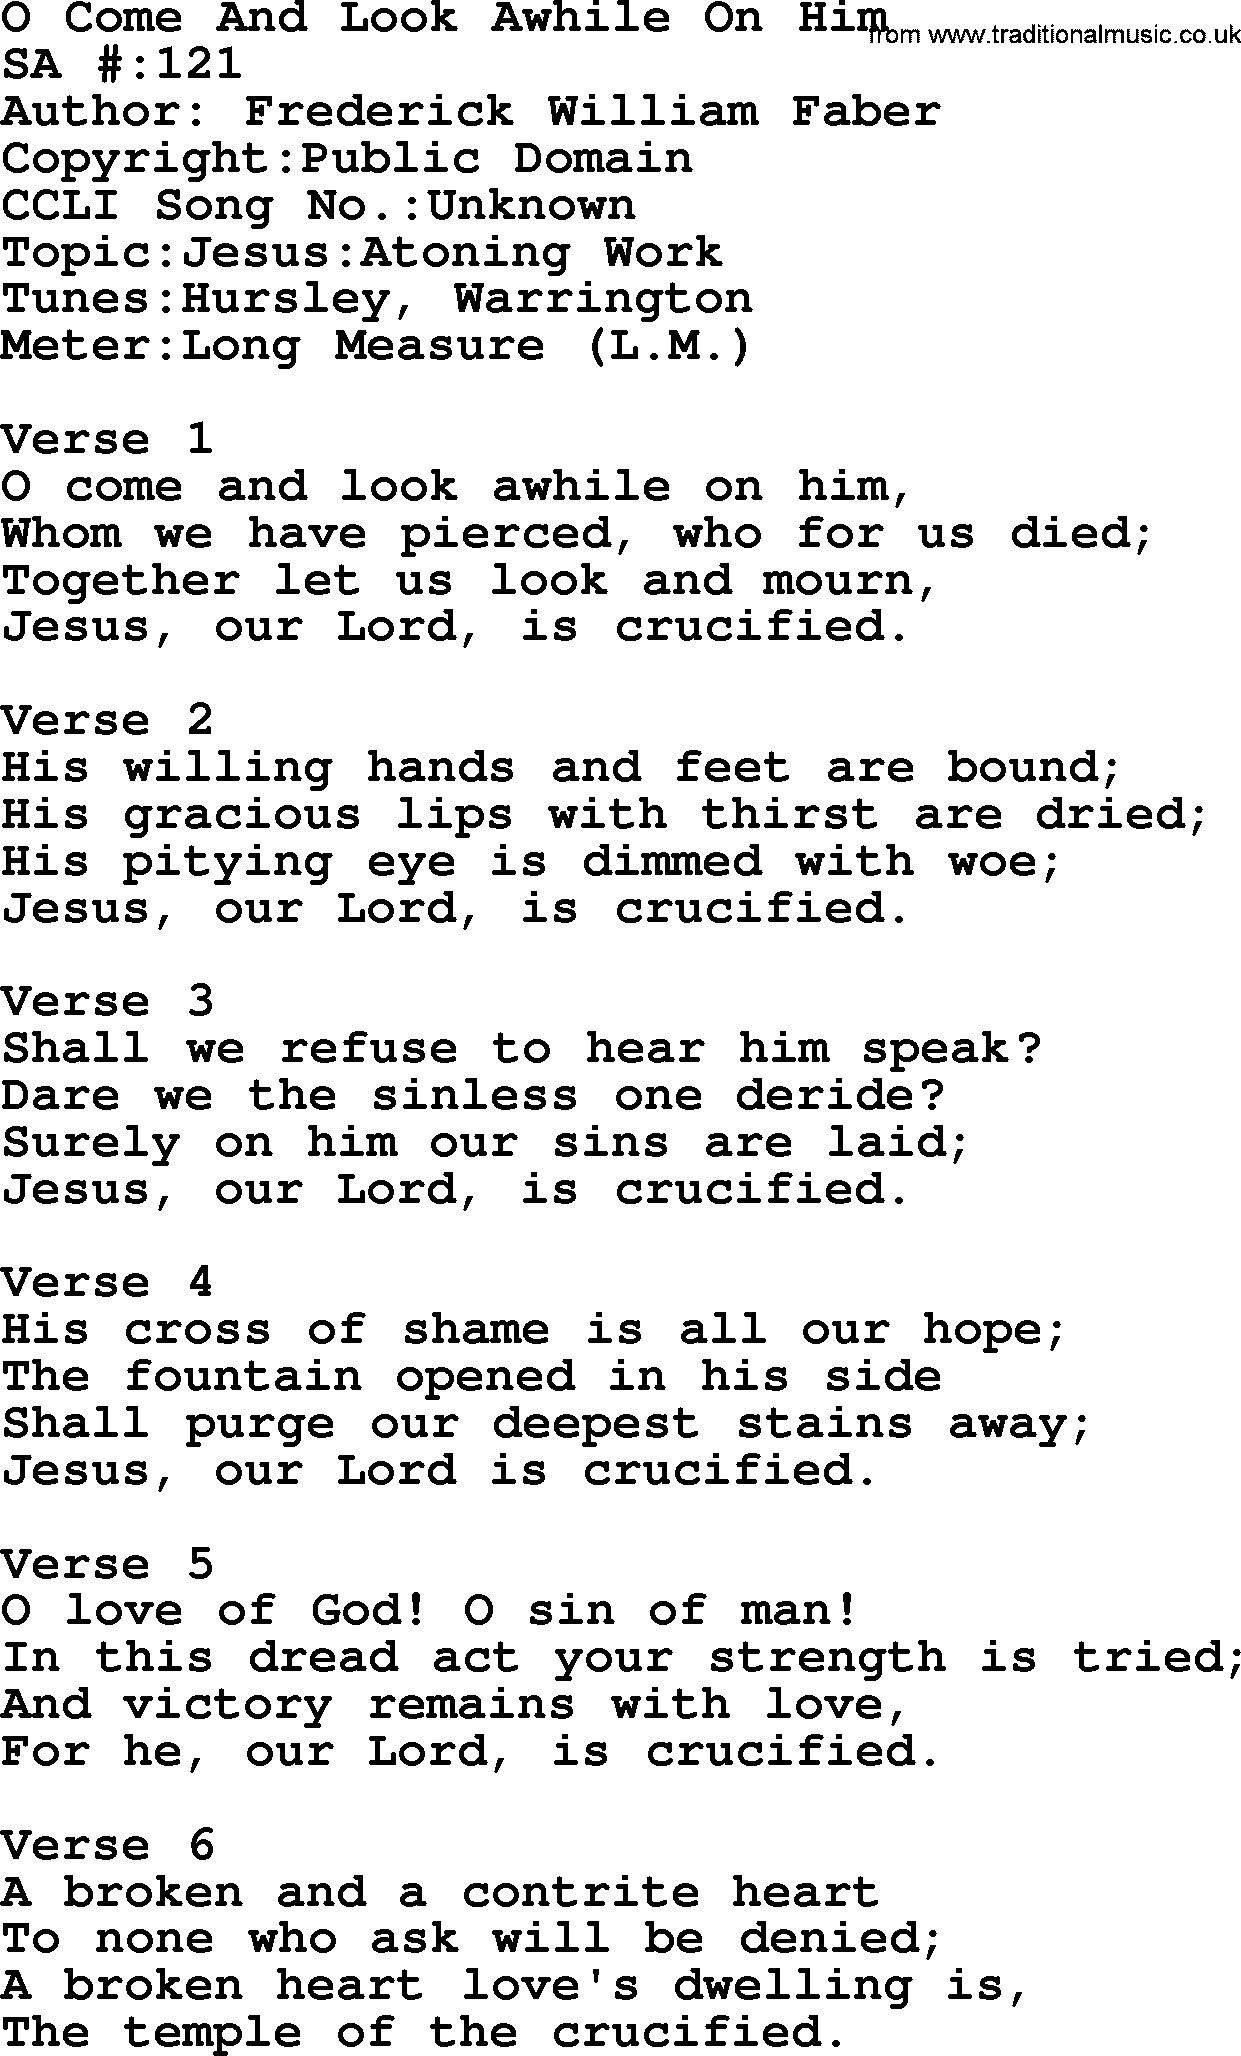 Salvation Army Hymnal, title: O Come And Look Awhile On Him, with lyrics and PDF,